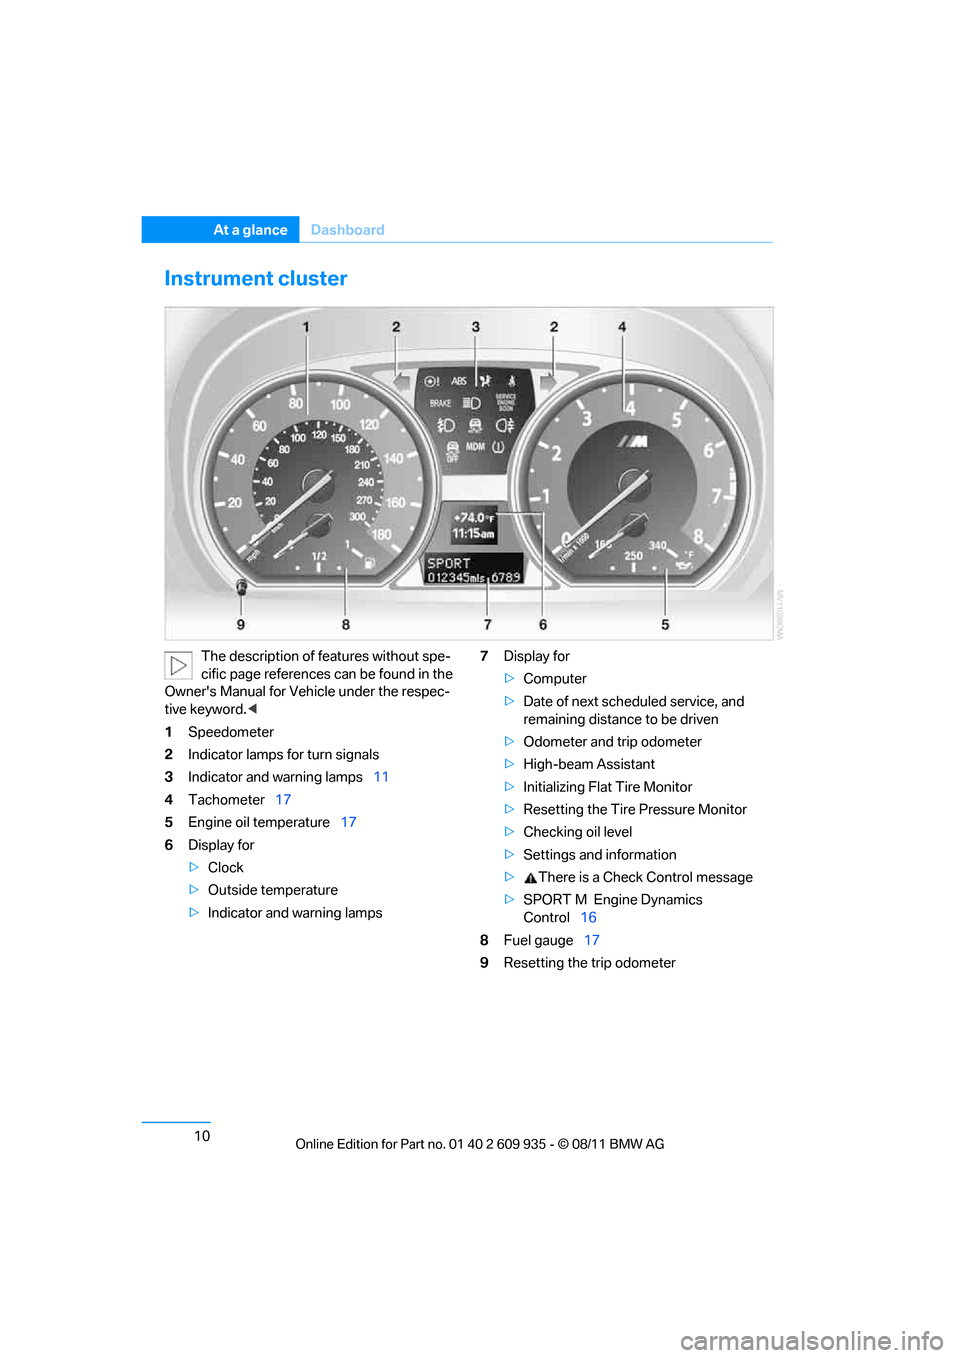 BMW 1M 2011 E82 Owners Manual 10
At a glanceDashboard
Instrument cluster
The description of features without spe-
cific page references can be found in the 
Owners Manual for Vehicle under the respec-
tive keyword. <
1 Speedomete